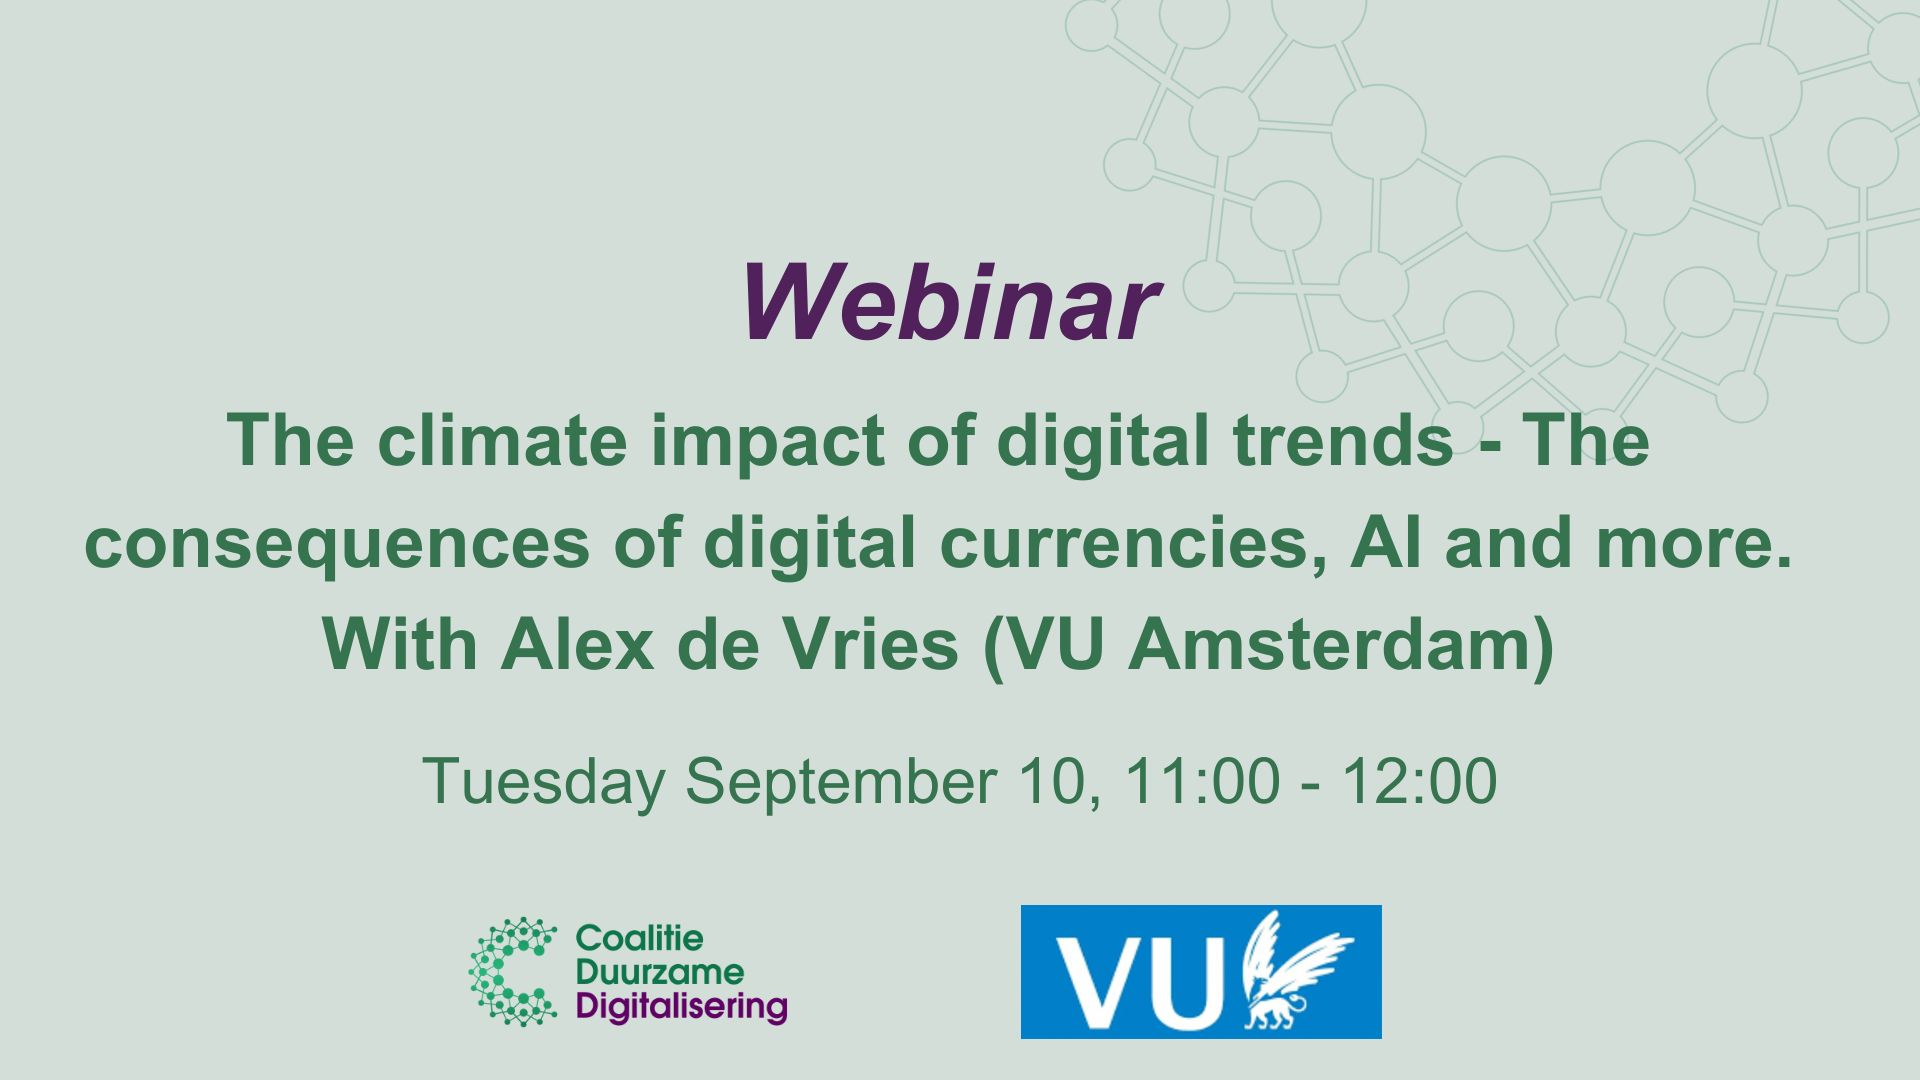 Webinar: The climate impact of digital trends - The consequences of digital currencies, AI and more with Alex de Vries (VU Amsterdam)